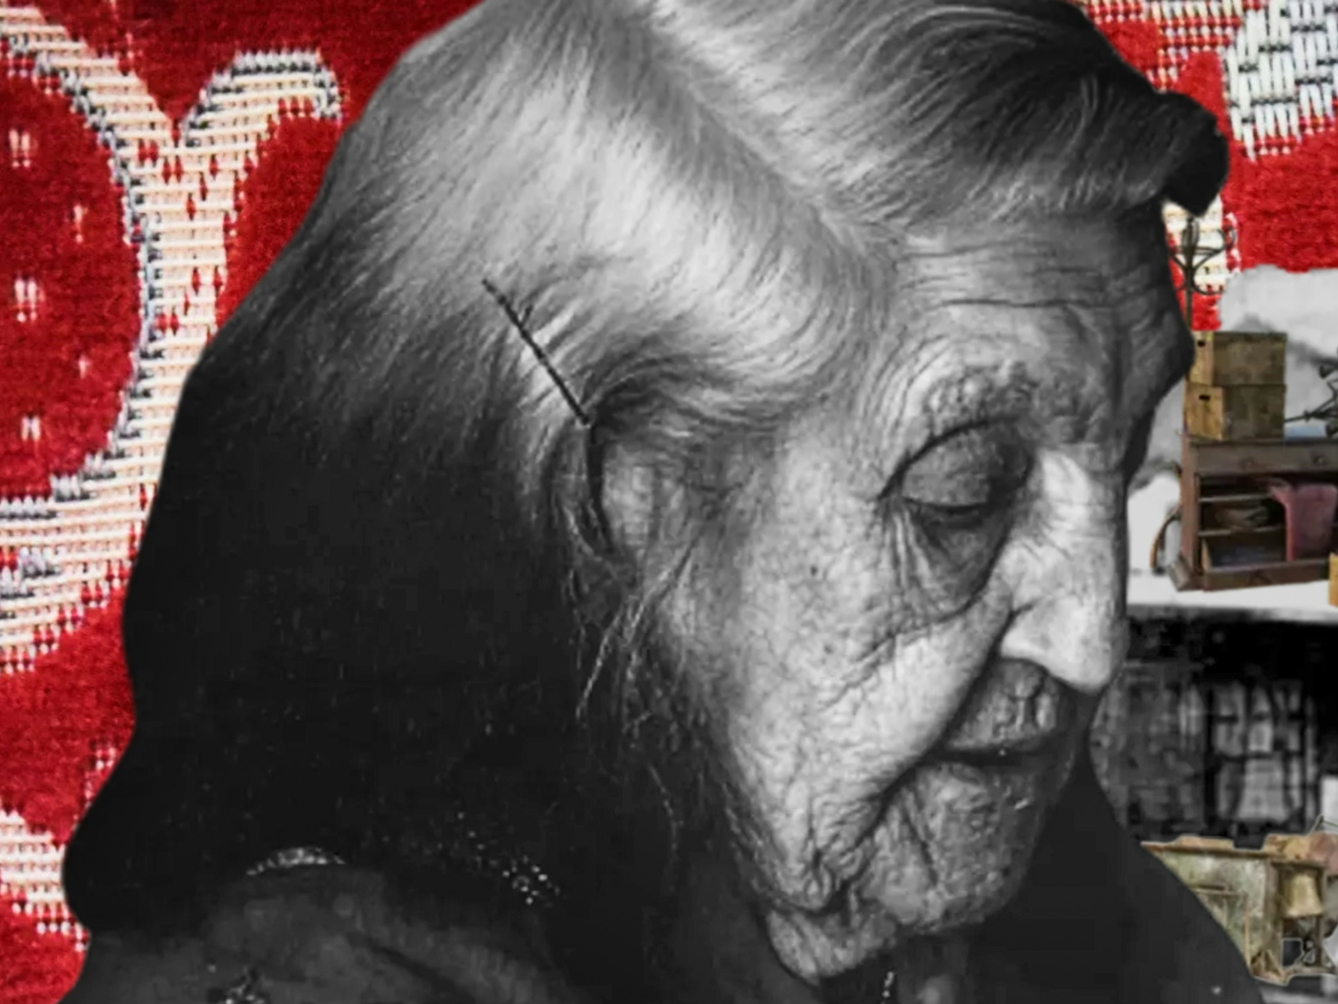 Crop of a colourful digital collage. In the foreground is a black and white photograph cut-out of an elderly woman looking downwards. A bobby pin pulls back the grey hair around her right ear. She is wearing a flowery embroidered shawl. Behind the elderly woman and within her eye line is a black and white cut out of a three story toy dollhouse. The walls and roof of one side of the dollhouse have been removed, exposing the interior of the house. Inside the dollhouse in the different rooms there are many small, colourful cut outs of household objects and furniture, including an alarm clock, wooden chests of drawers, filled cardboard boxes, piles of books and bed sheets. The objects are stacked on top of each other messily, forming many piles. The background is a photograph of a red and white floral print. 